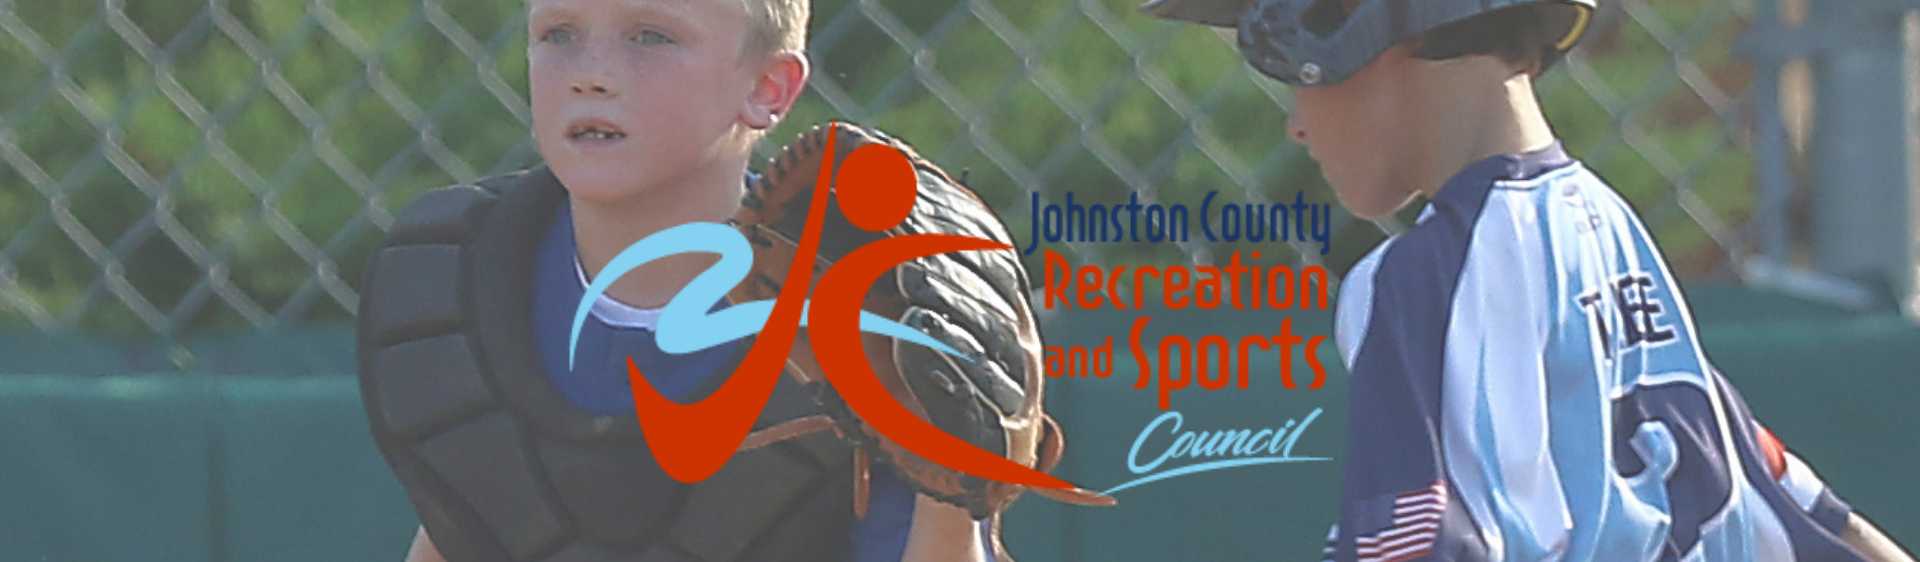 Recreation and Sports Council logo with baseball player.